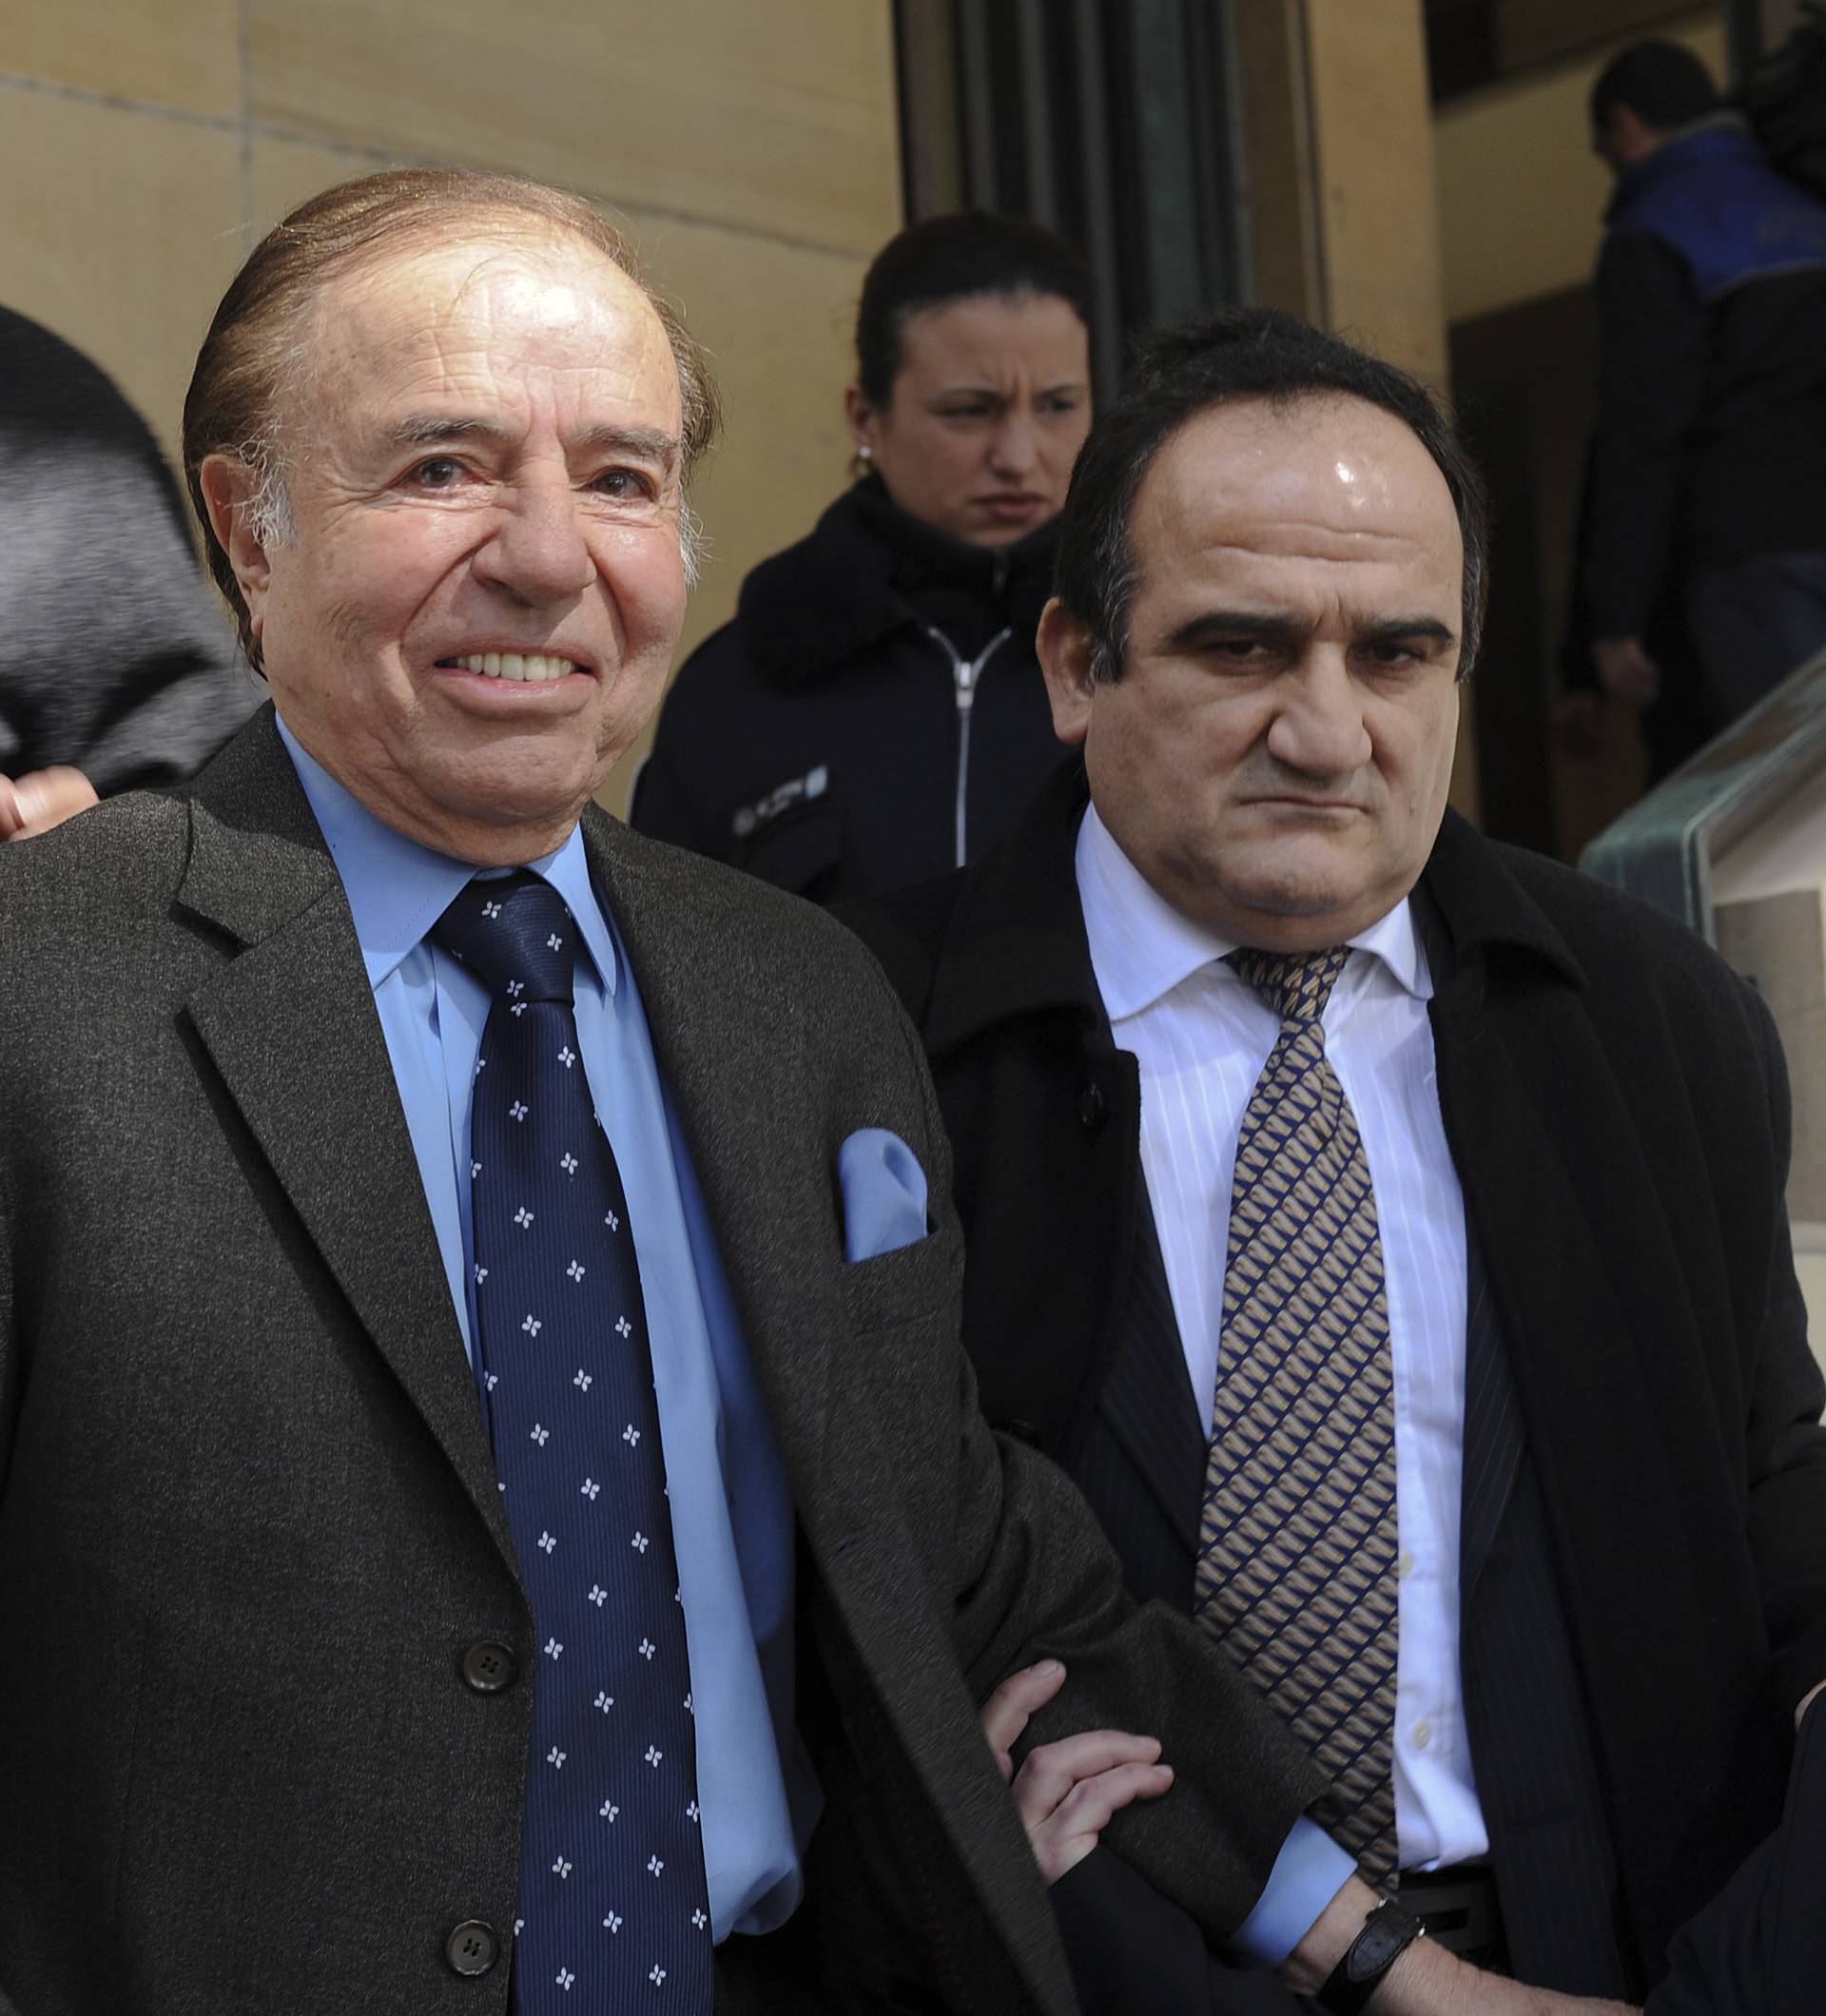 Carlos Saul Menem has pleaded not guilty to illegally selling arms to Ecuador and Croatia